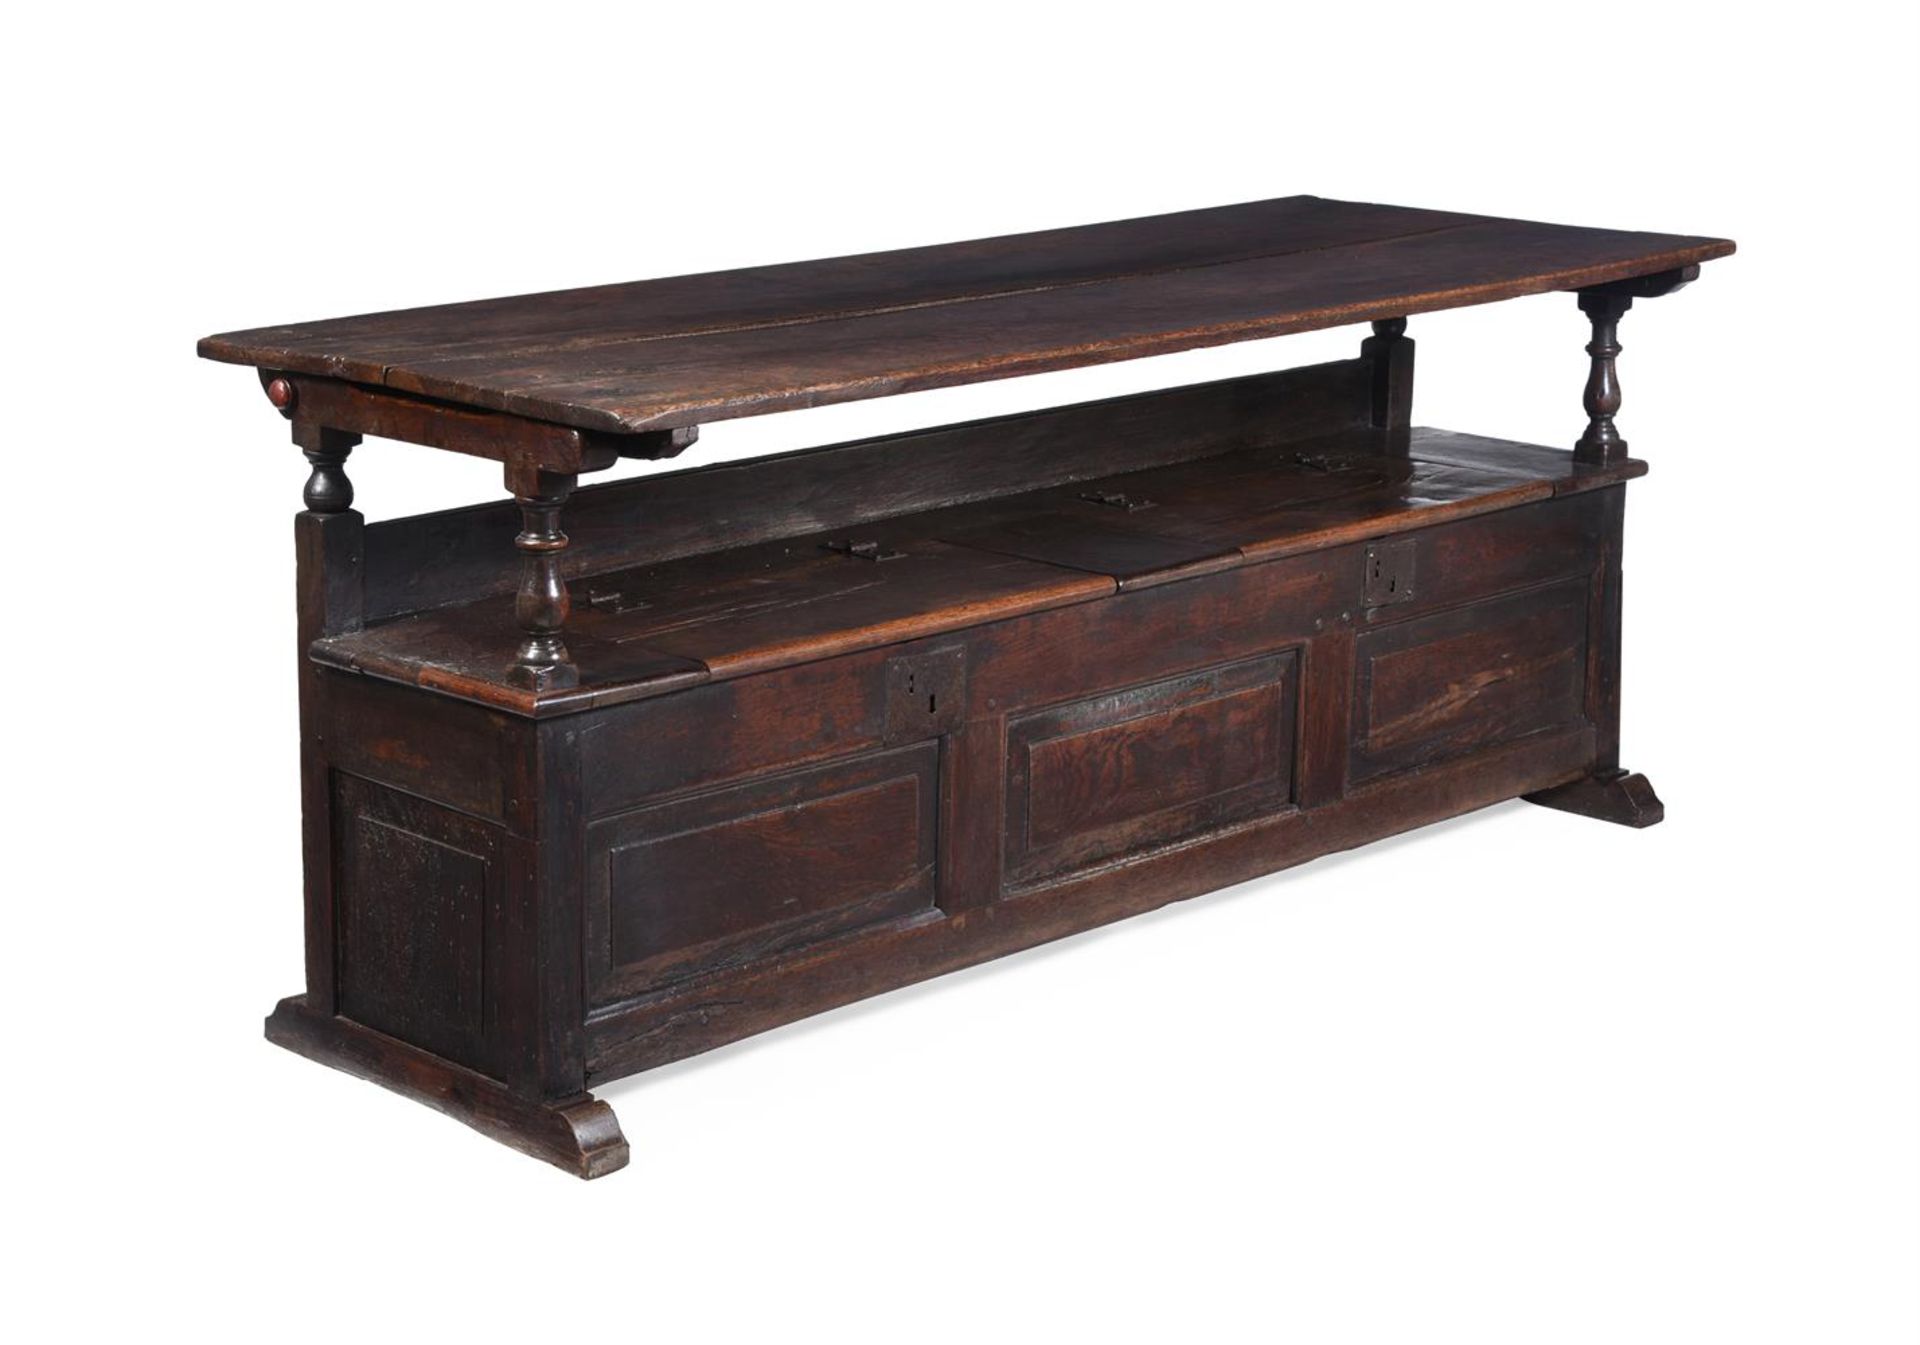 A CARVED OAK METAMORPHIC TABLE SETTLE, LATE 17TH OR EARLY 18TH CENTURY - Image 2 of 3